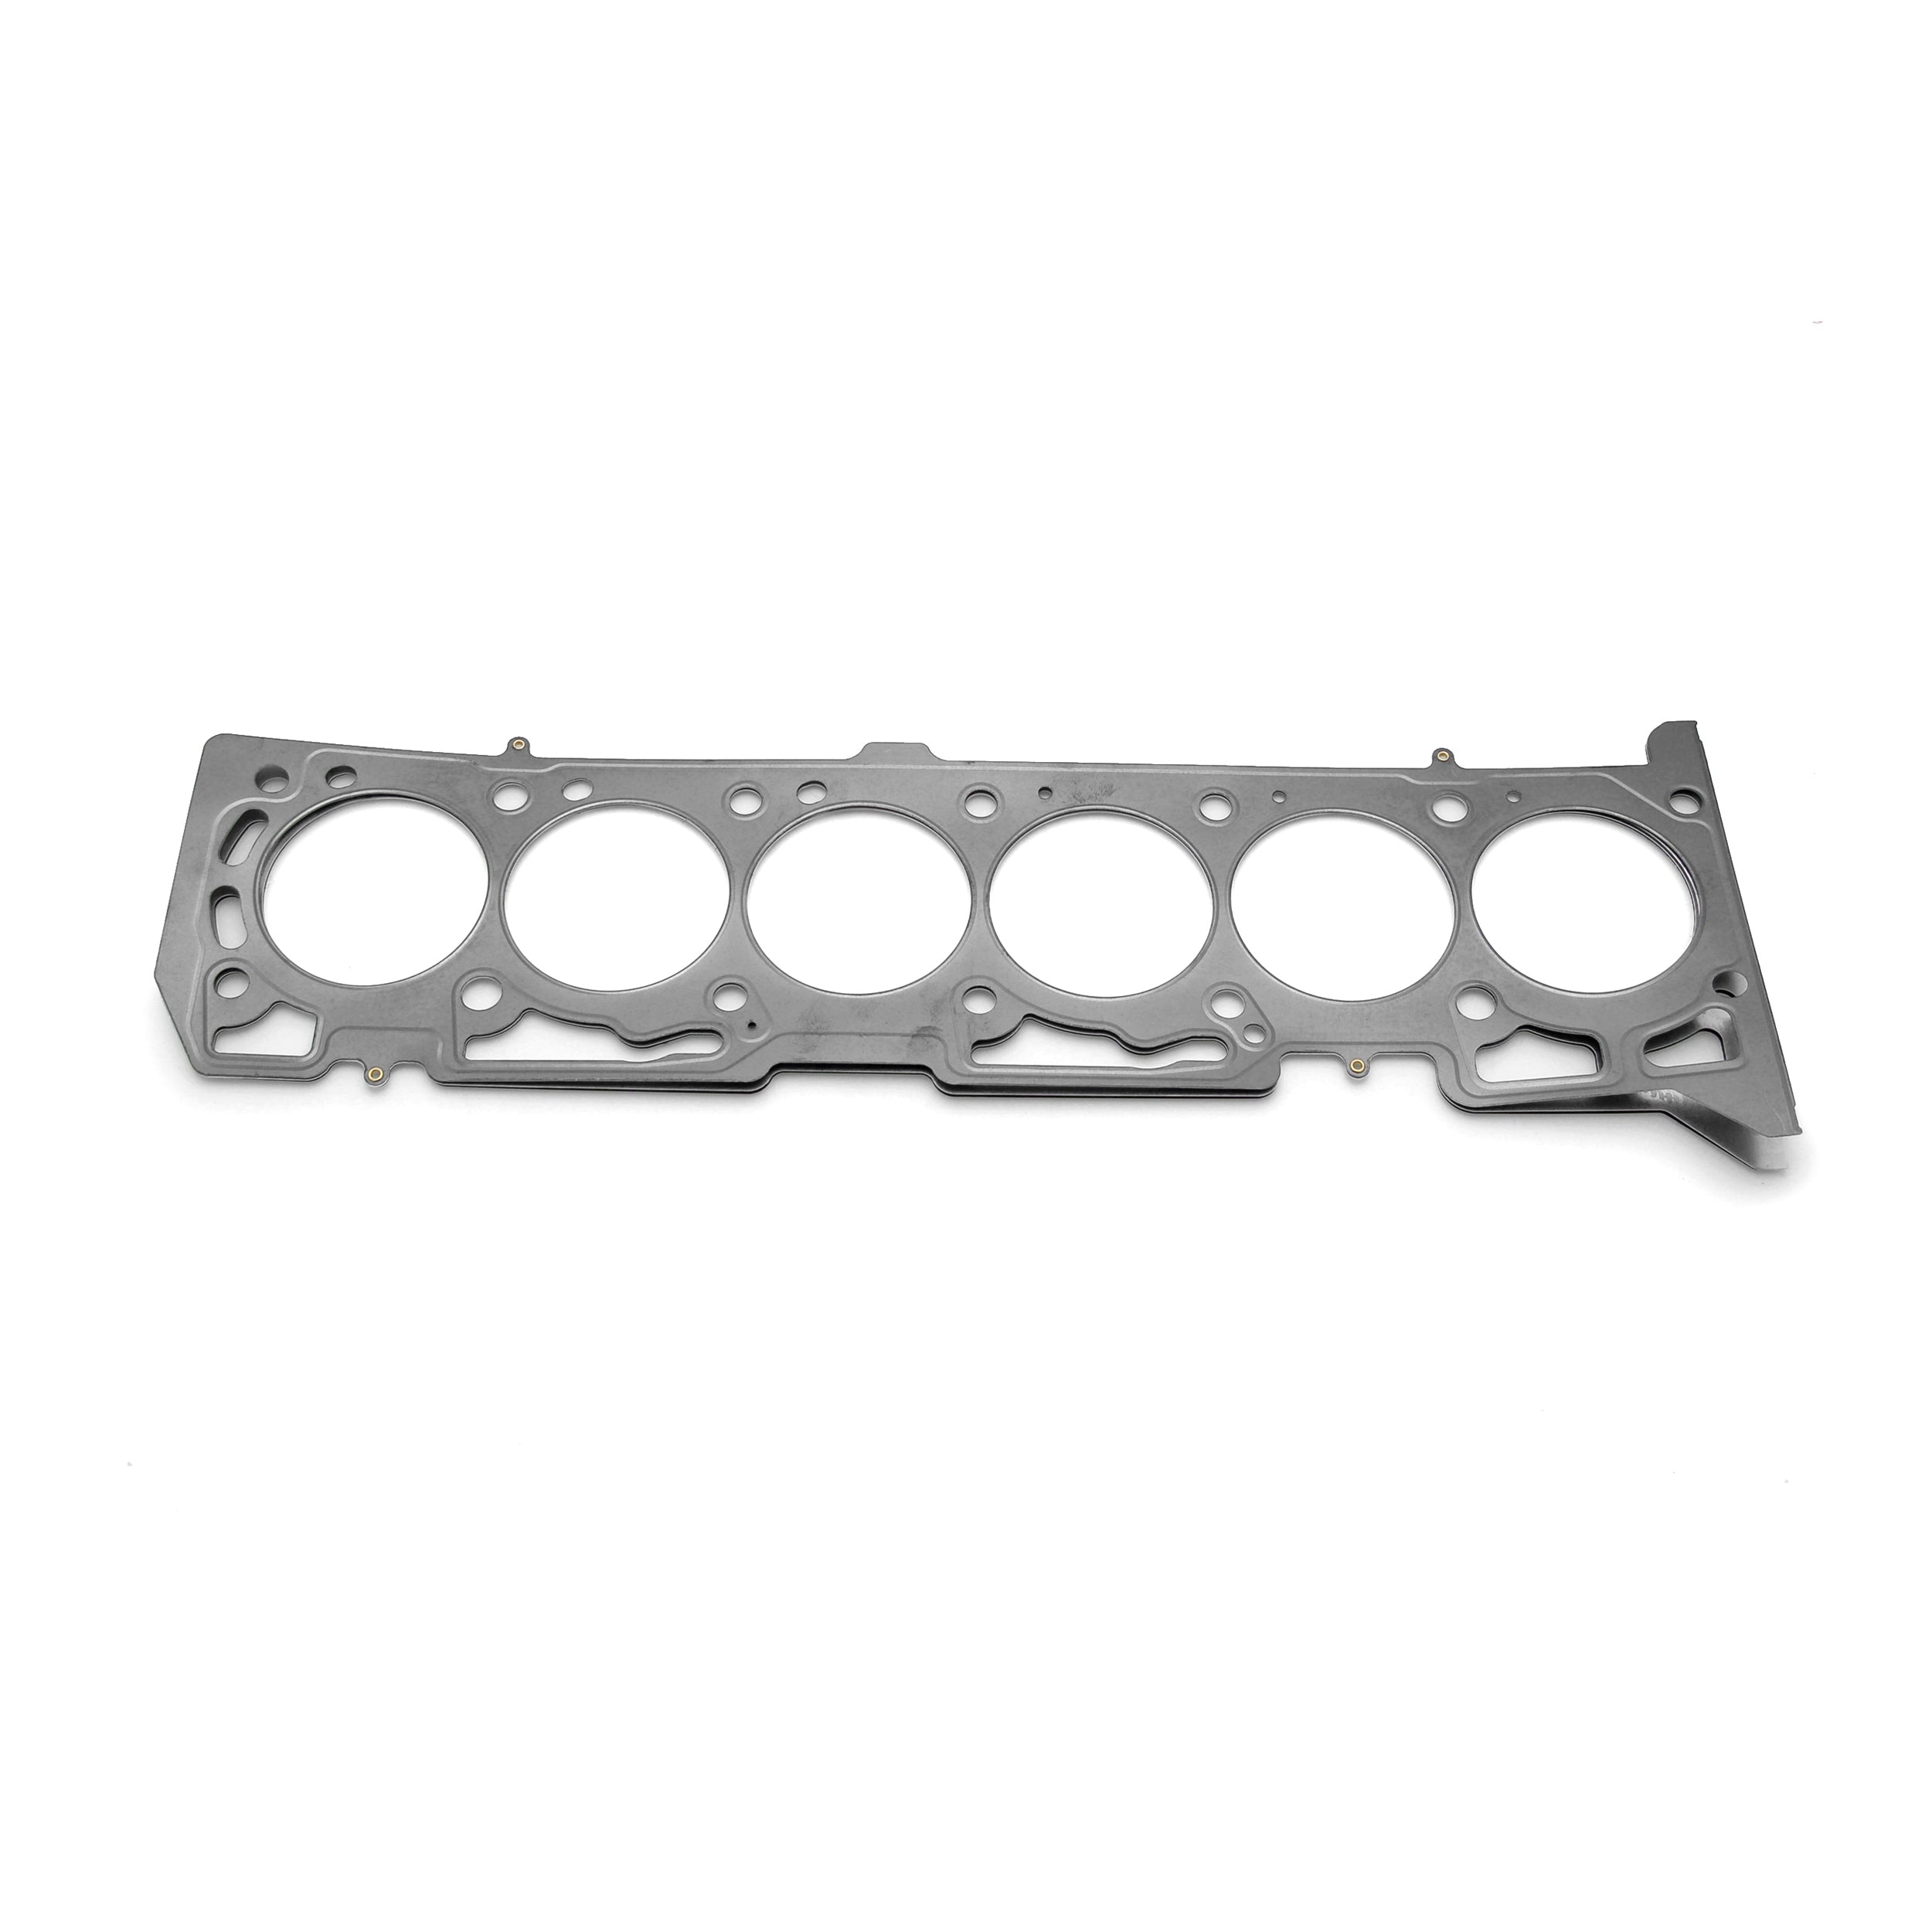 Cometic Ford Barra XR6 Head Gasket 1mm Thick (93mm) - C5957-040